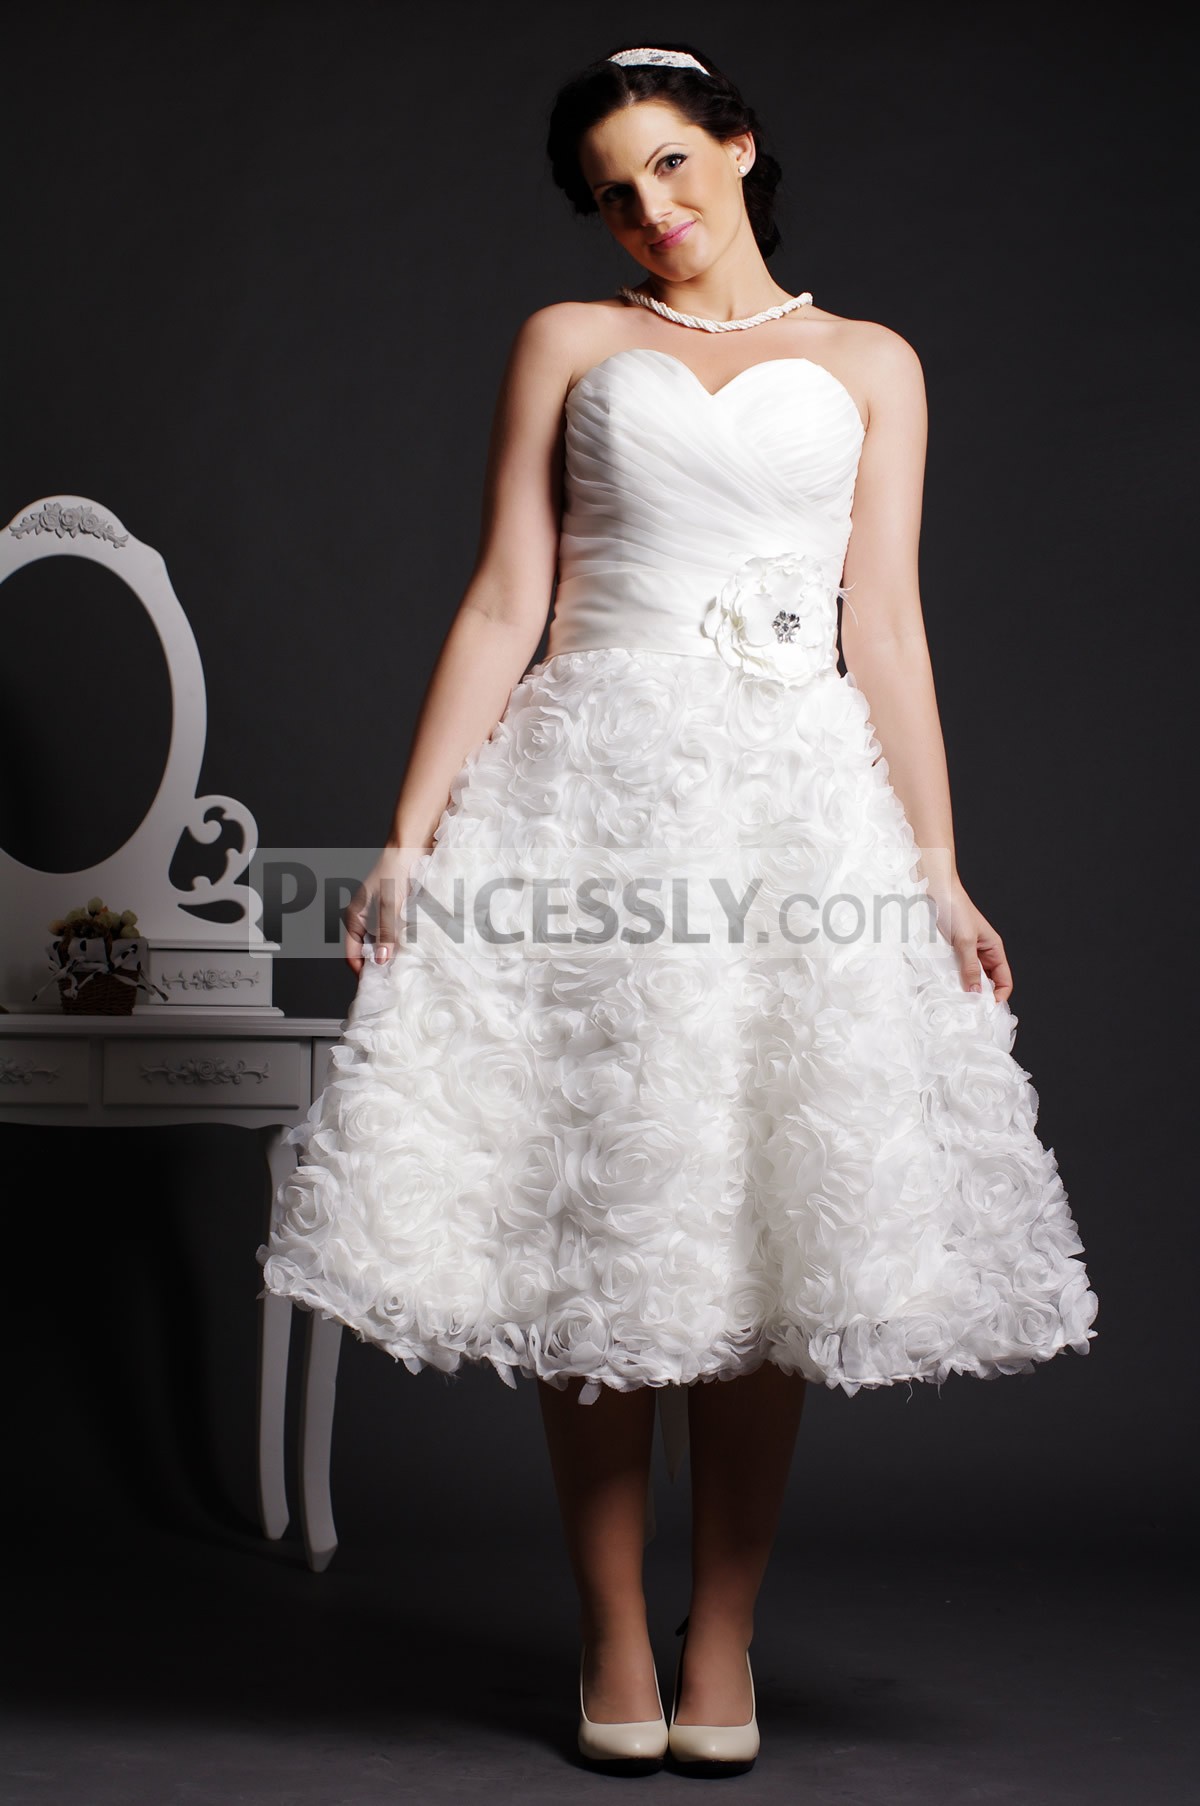 A-line Strapless Sweetheart Gathered Rosettes Belted Organza Wedding Dress w/ Crystals & Flowers